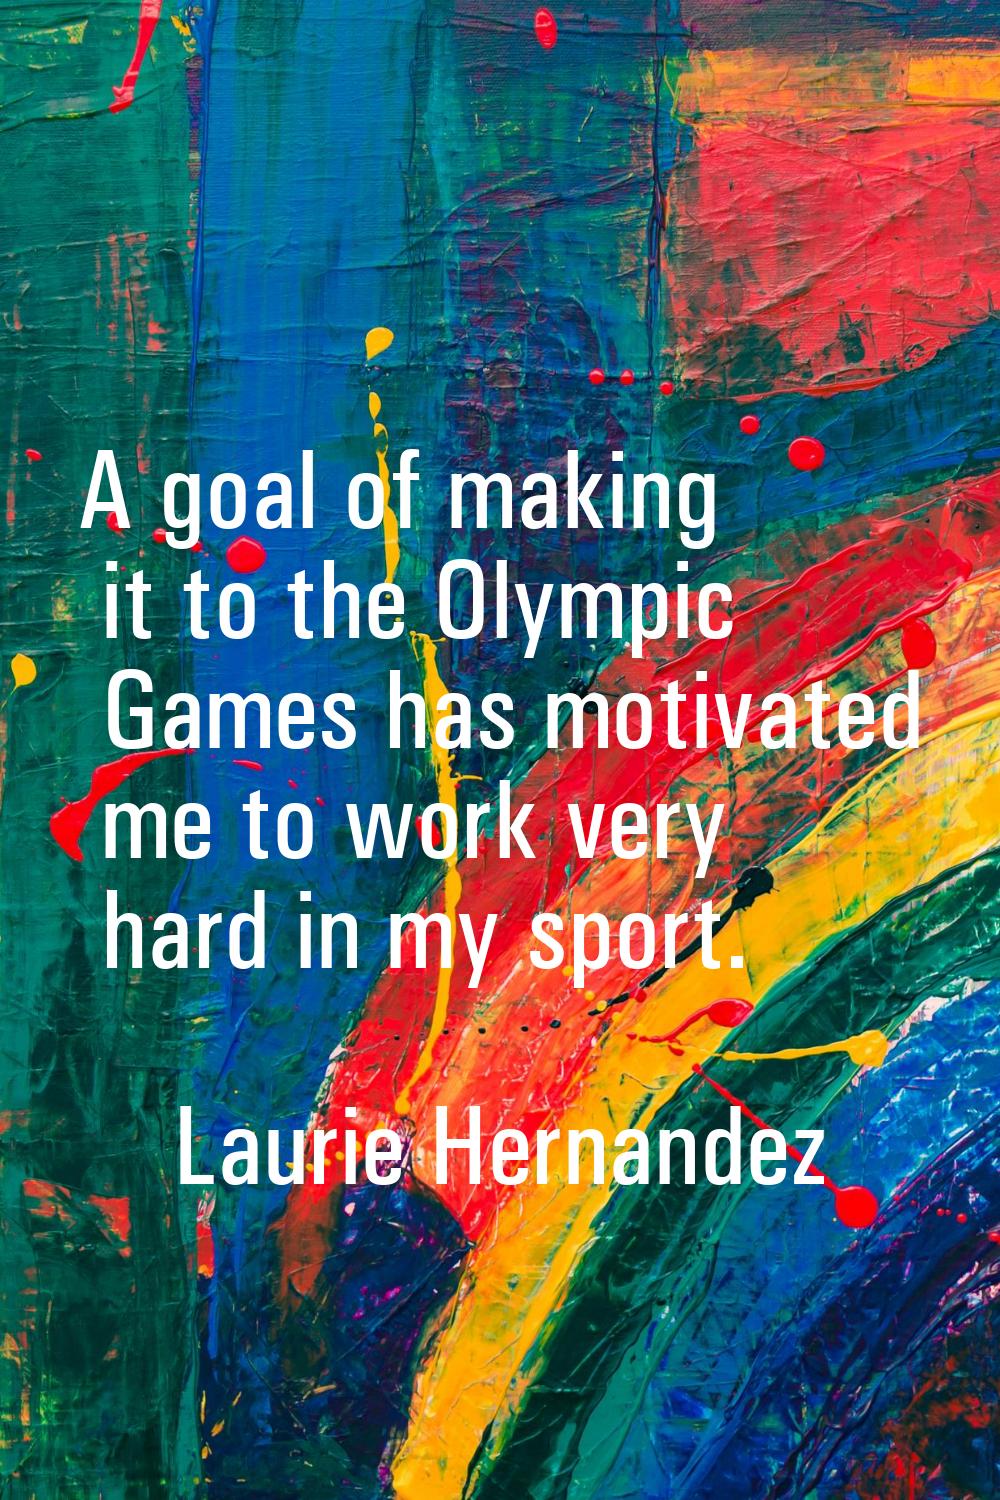 A goal of making it to the Olympic Games has motivated me to work very hard in my sport.